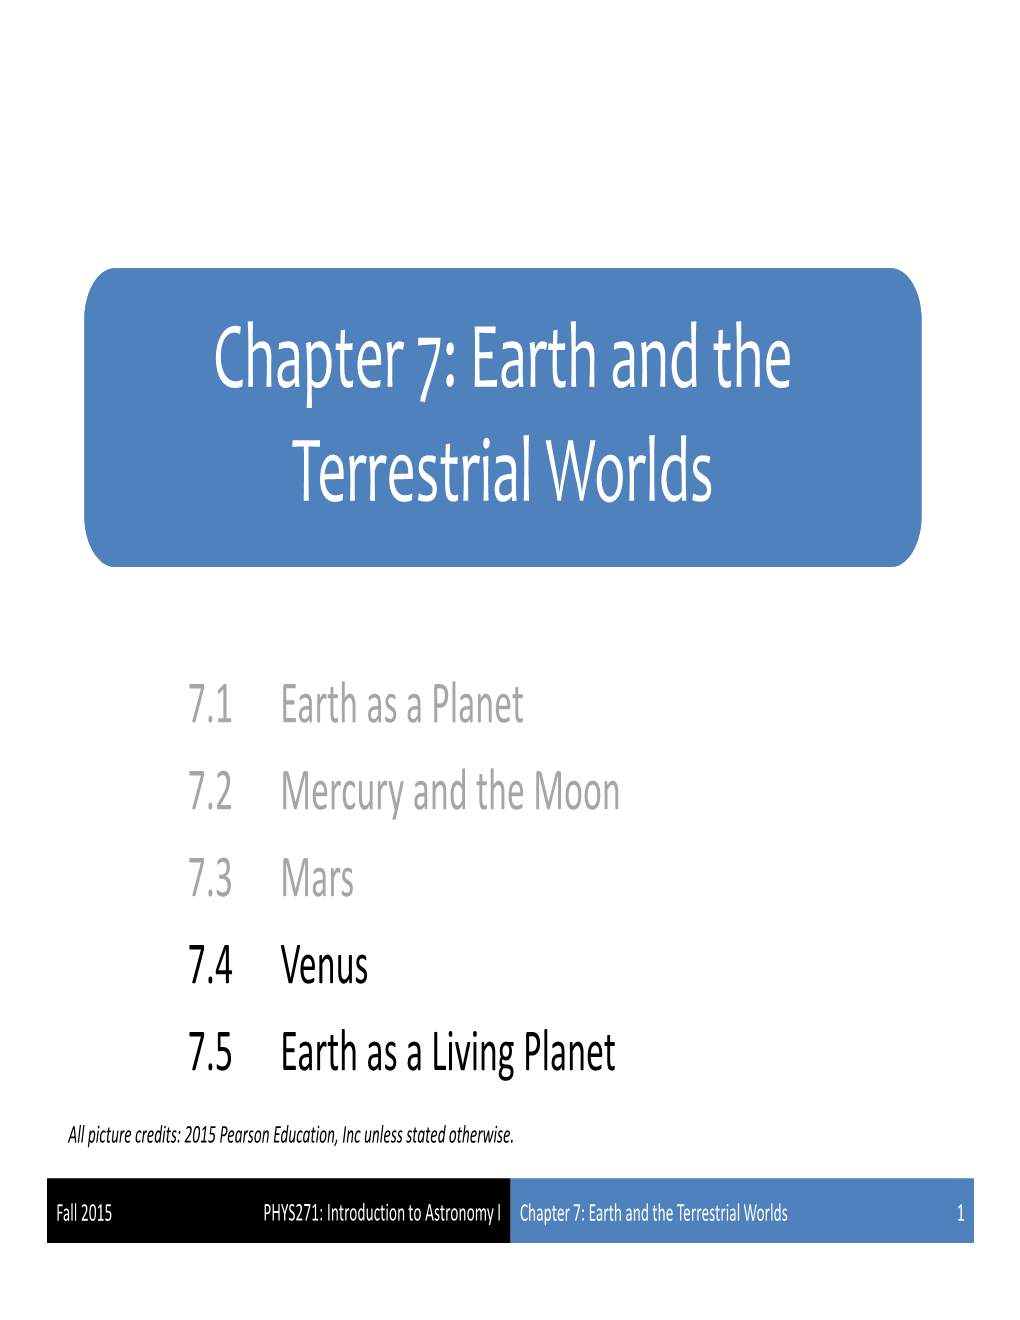 Chapter 7: Earth and the Terrestrial Worlds